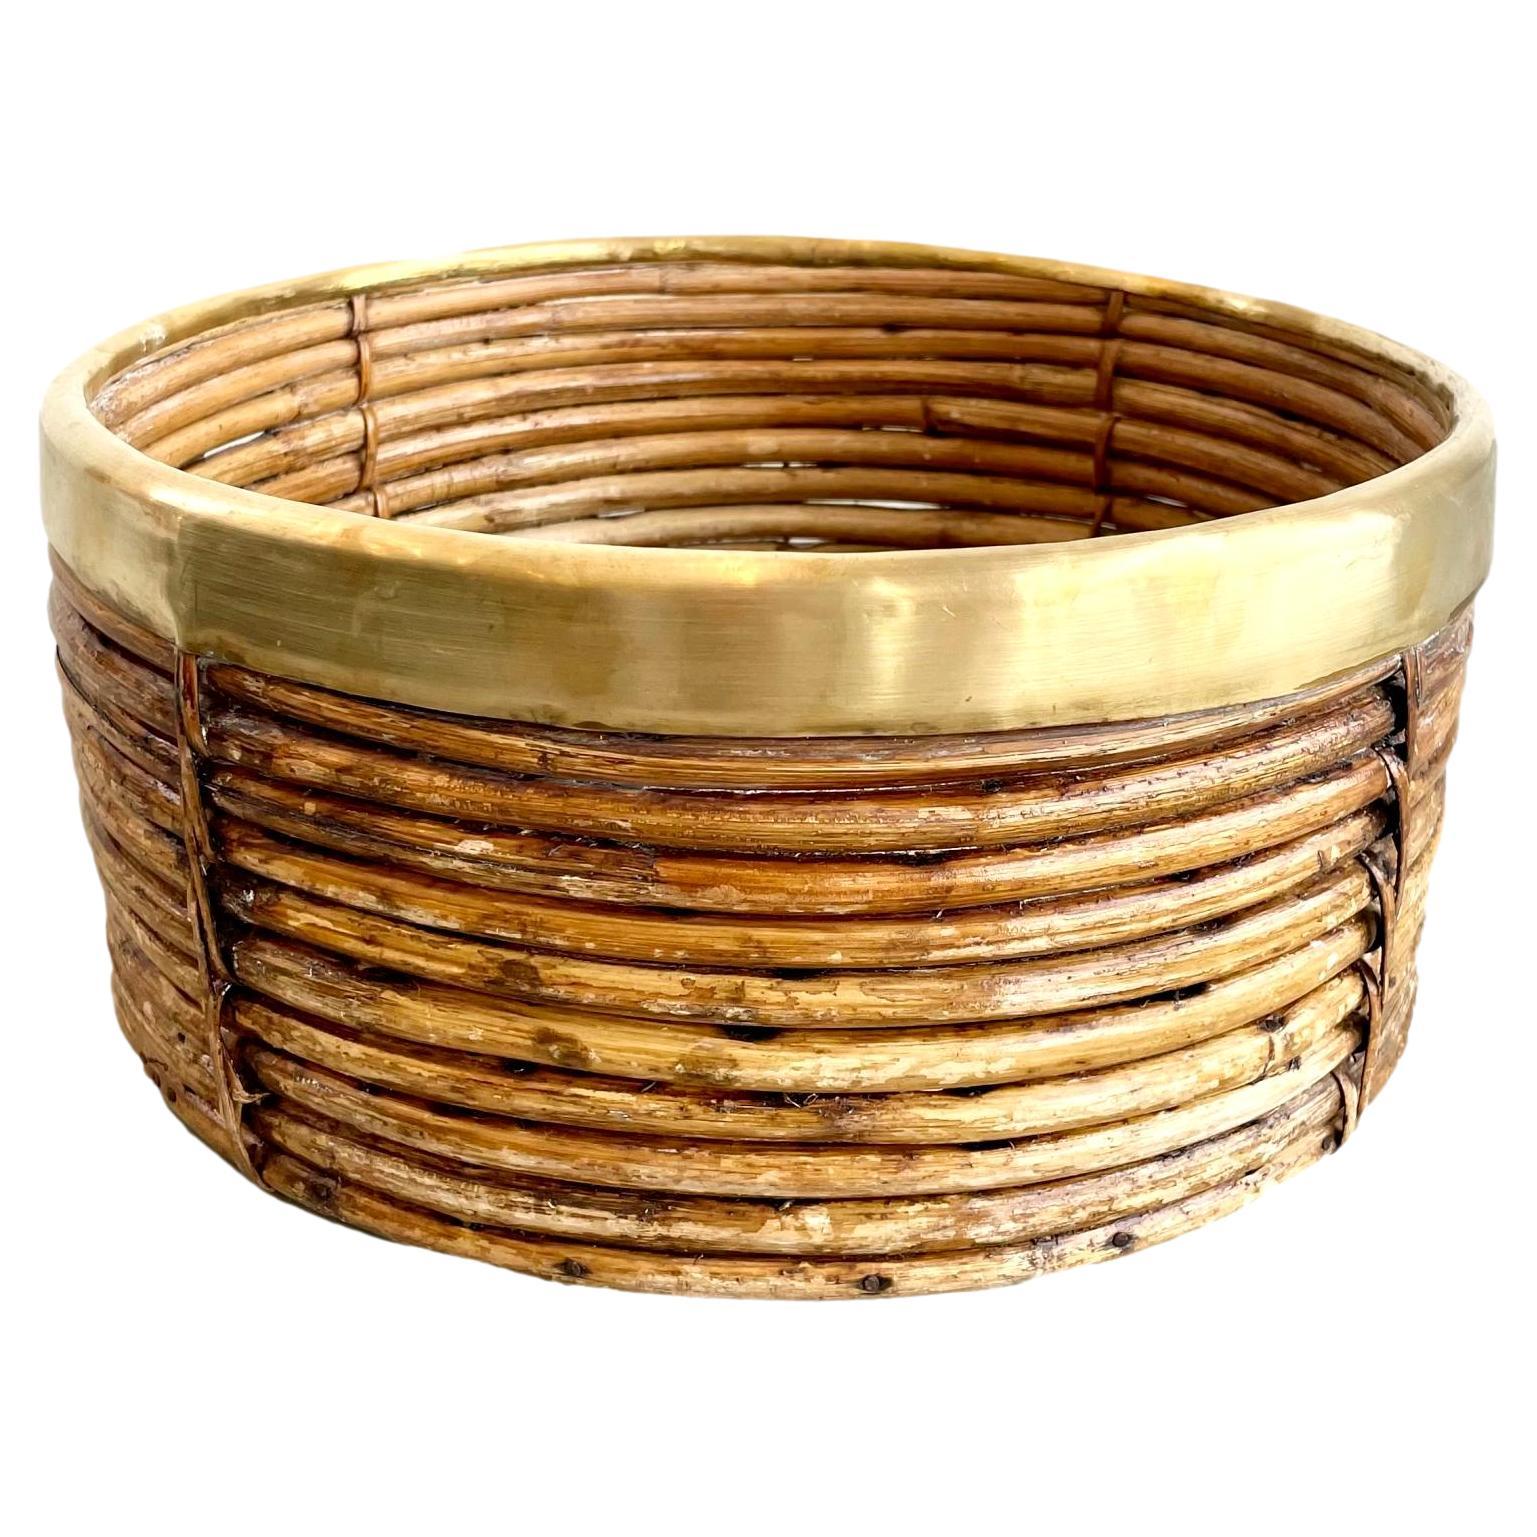 Rattan and Brass Bowl in the Style of Gabriella Crespi, 1960s Italy